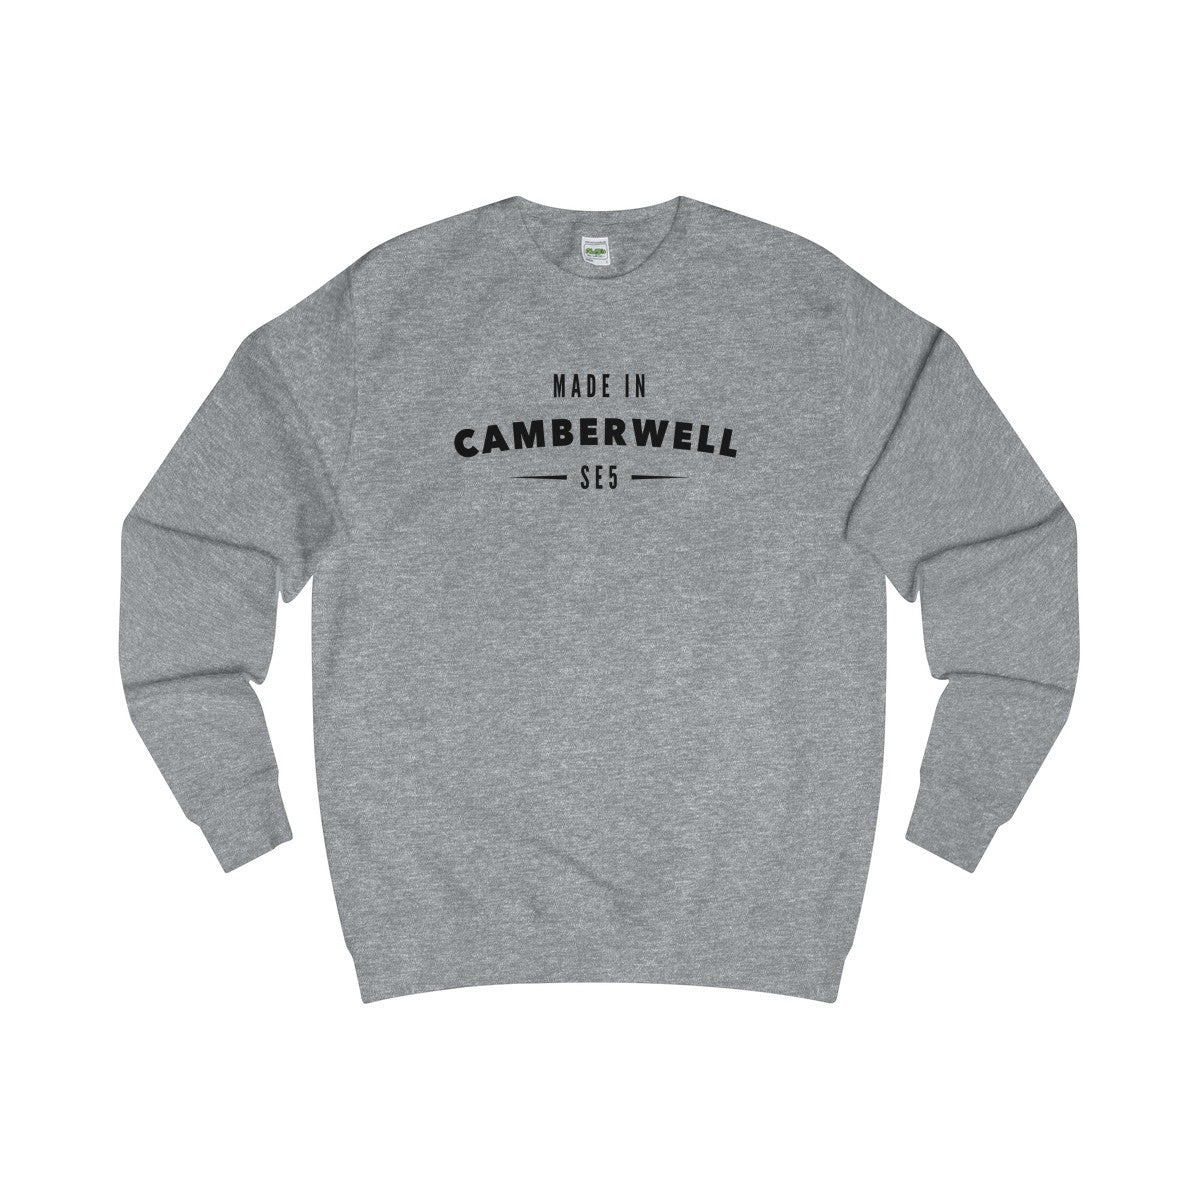 Made In Camberwell Sweater